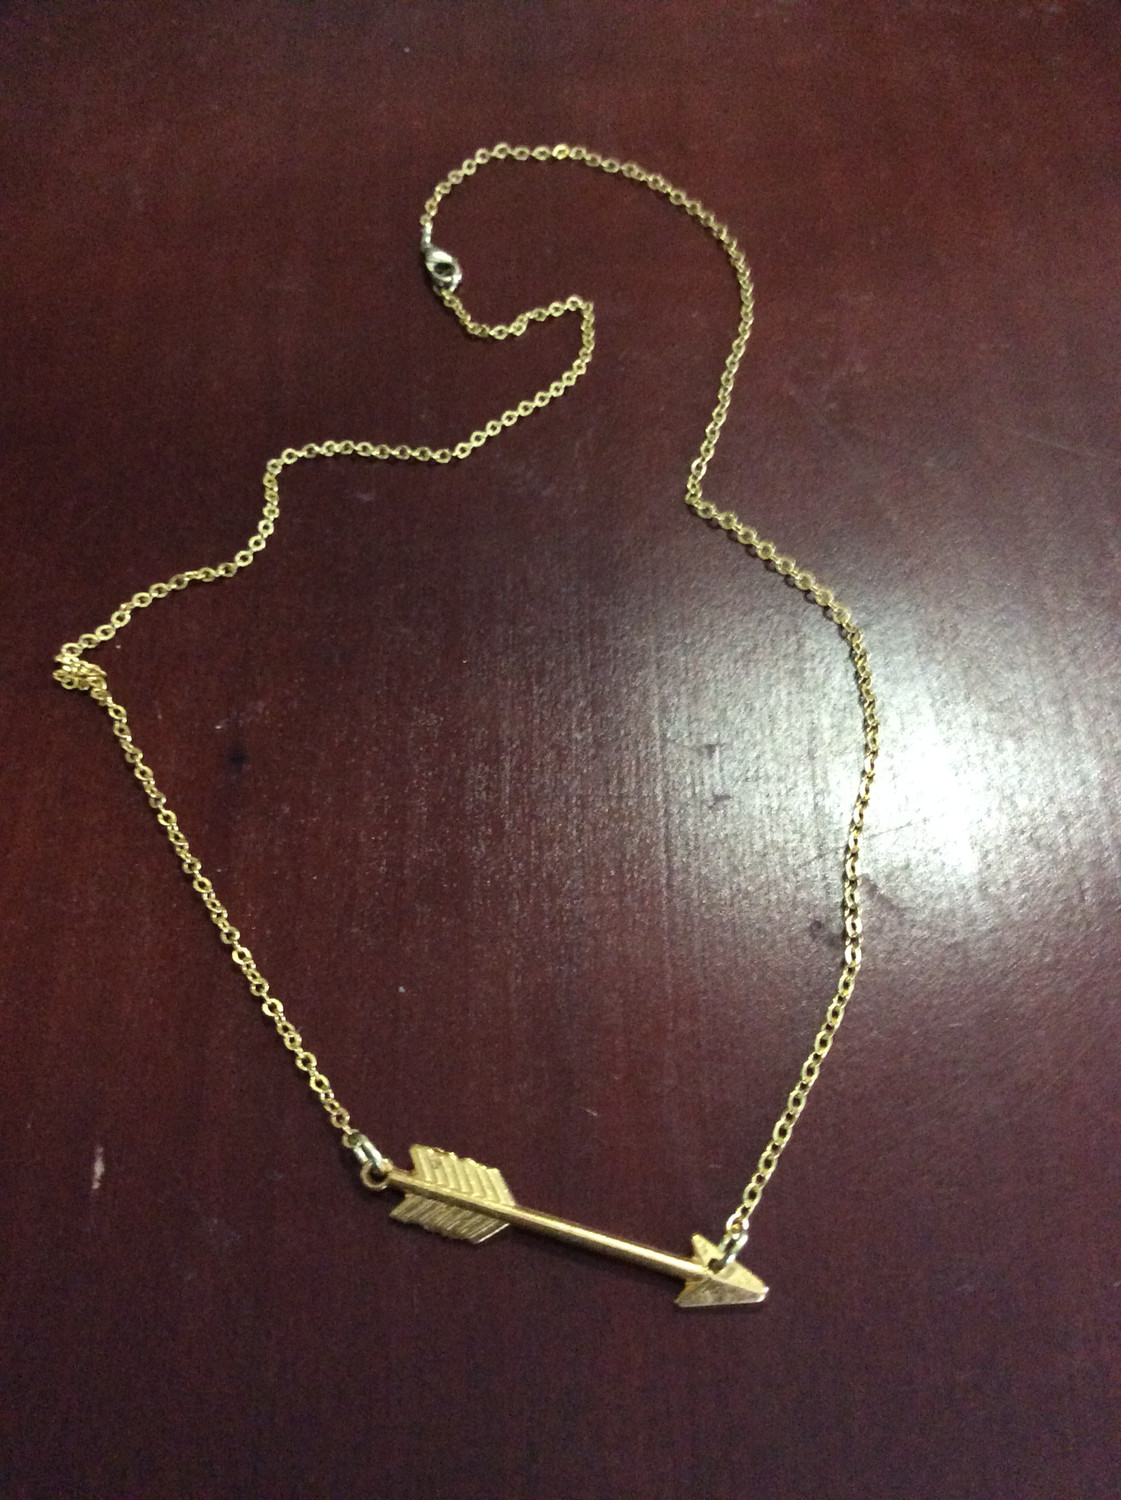 Arrow necklace, positive progression unto blessings, favorable opportunities and outcomes